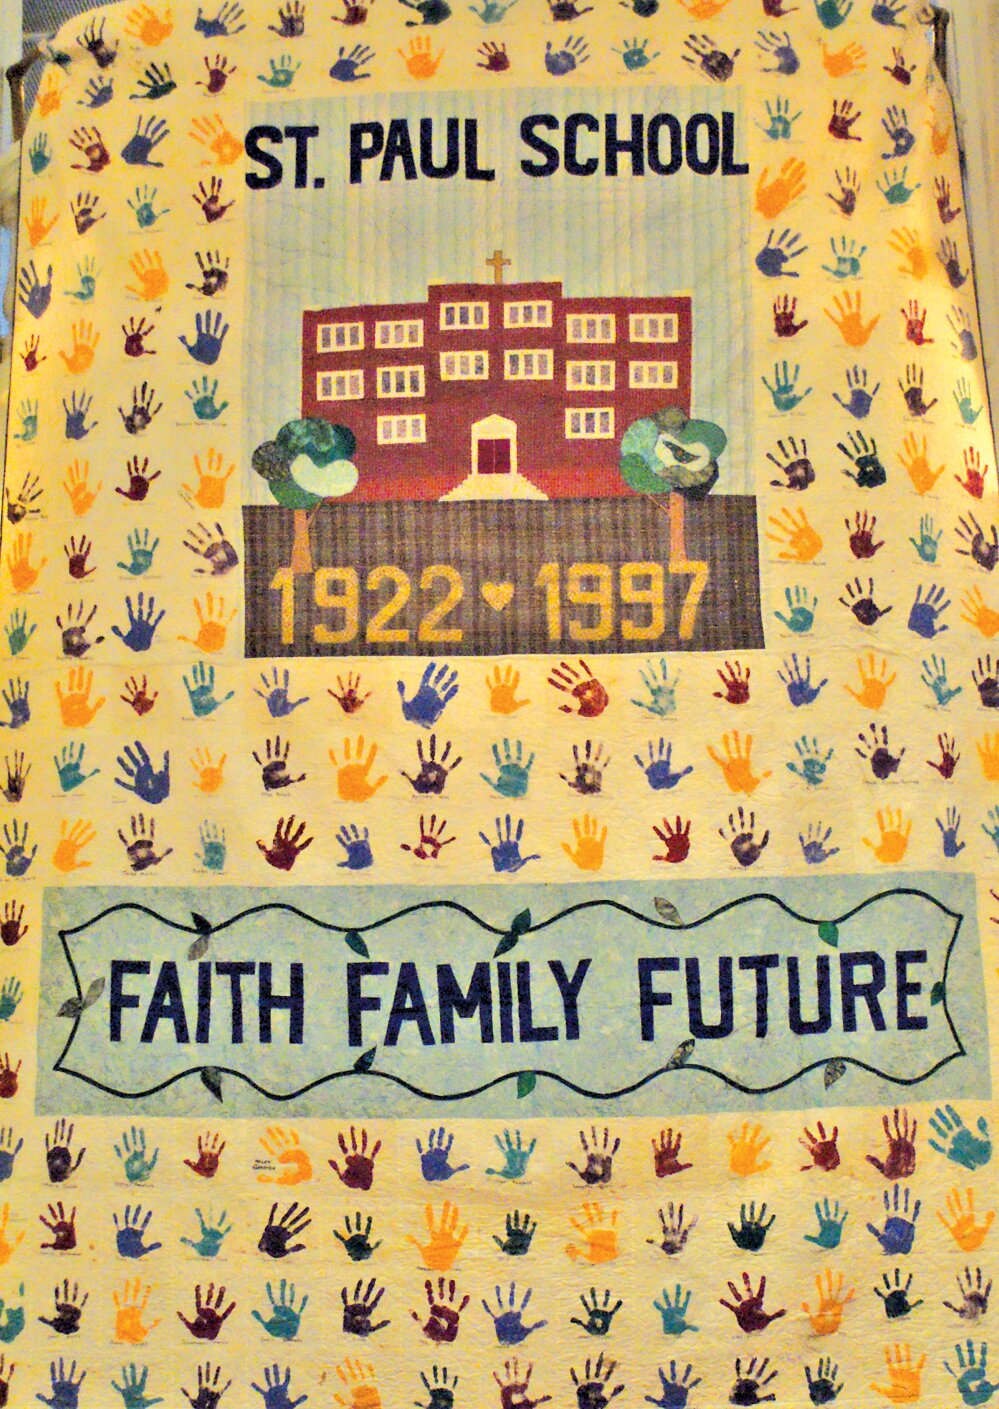 WOVEN FROM HISTORY: This quilt was made for St Paul School’s 75 anniversary by Gail Kelleher. Each handprint on the quilt is an actual handprint from every student and faculty member that attended the school in 1997. One space was left empty to represent every student to attend before that year and all those who would attend after. (Photo by Steve Popiel)